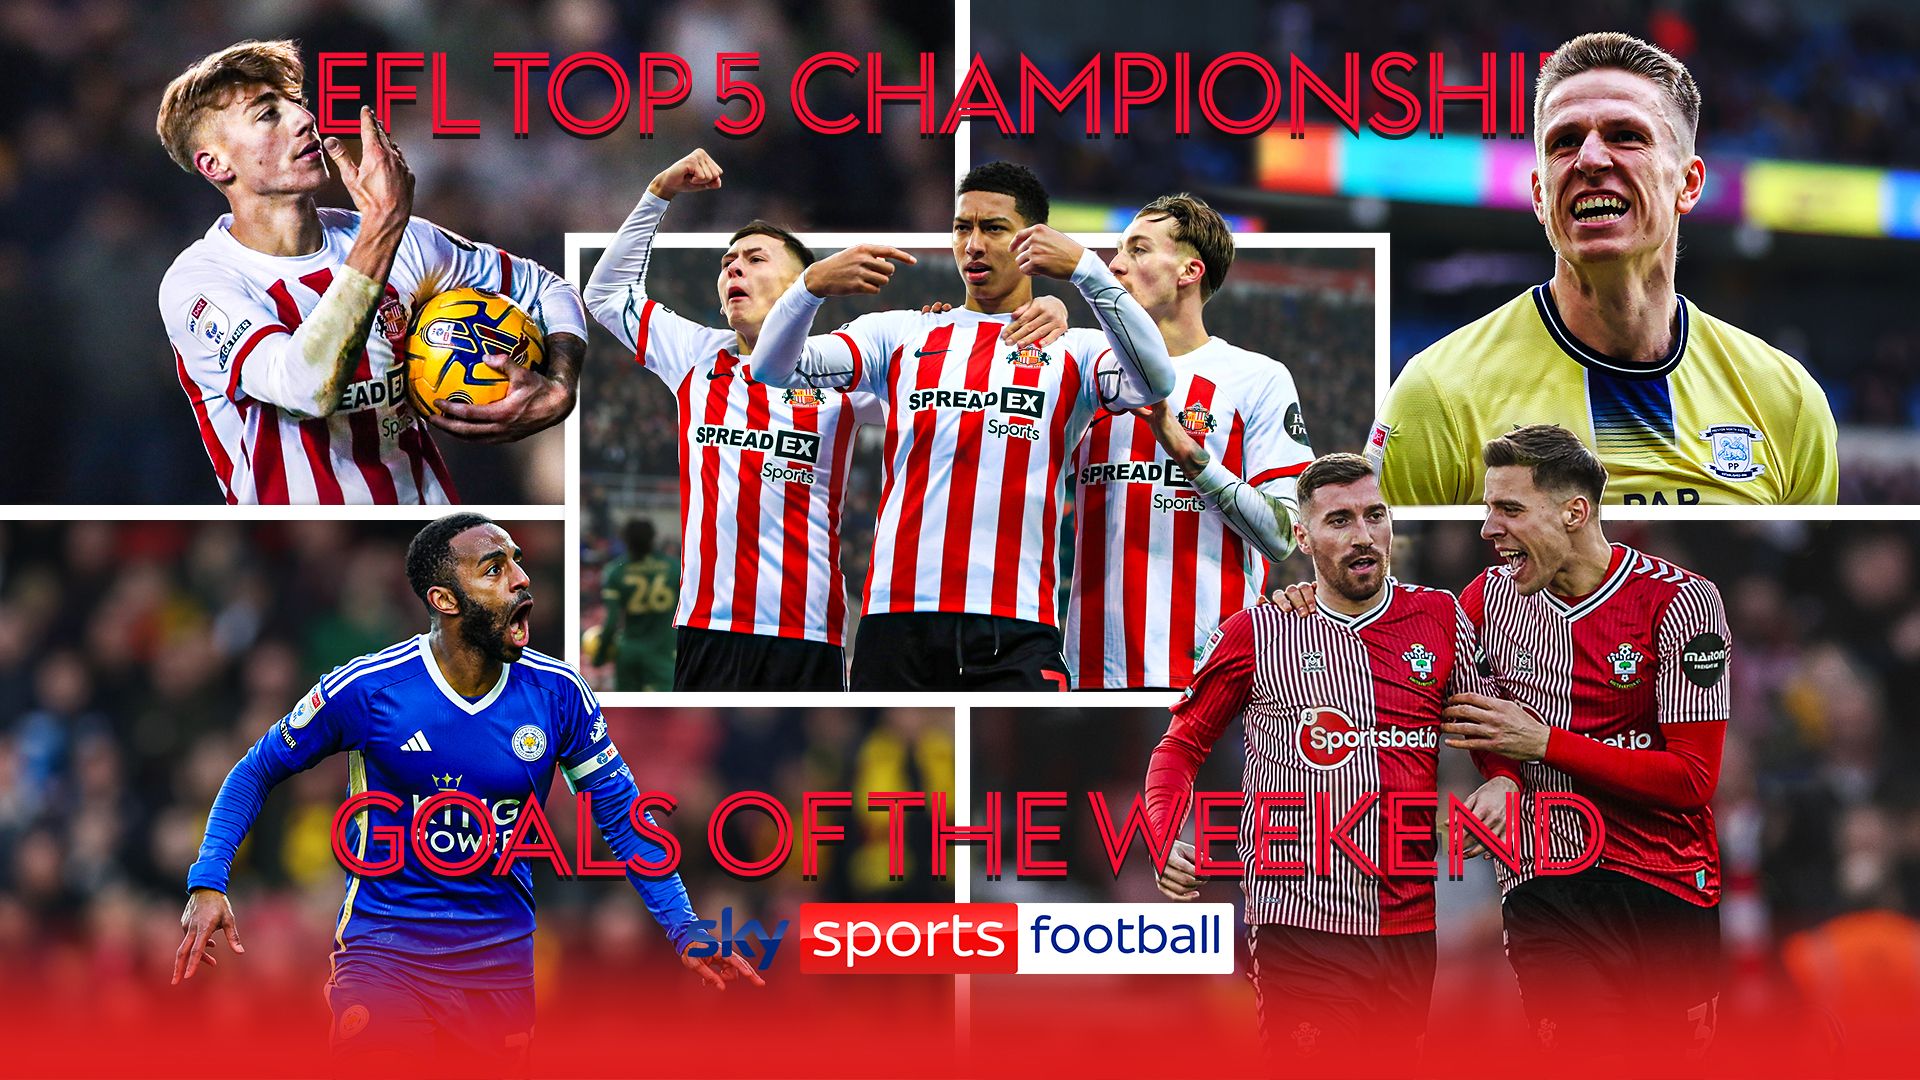 Top five Championship goals of the weekend | Bellingham, Pereira and more!